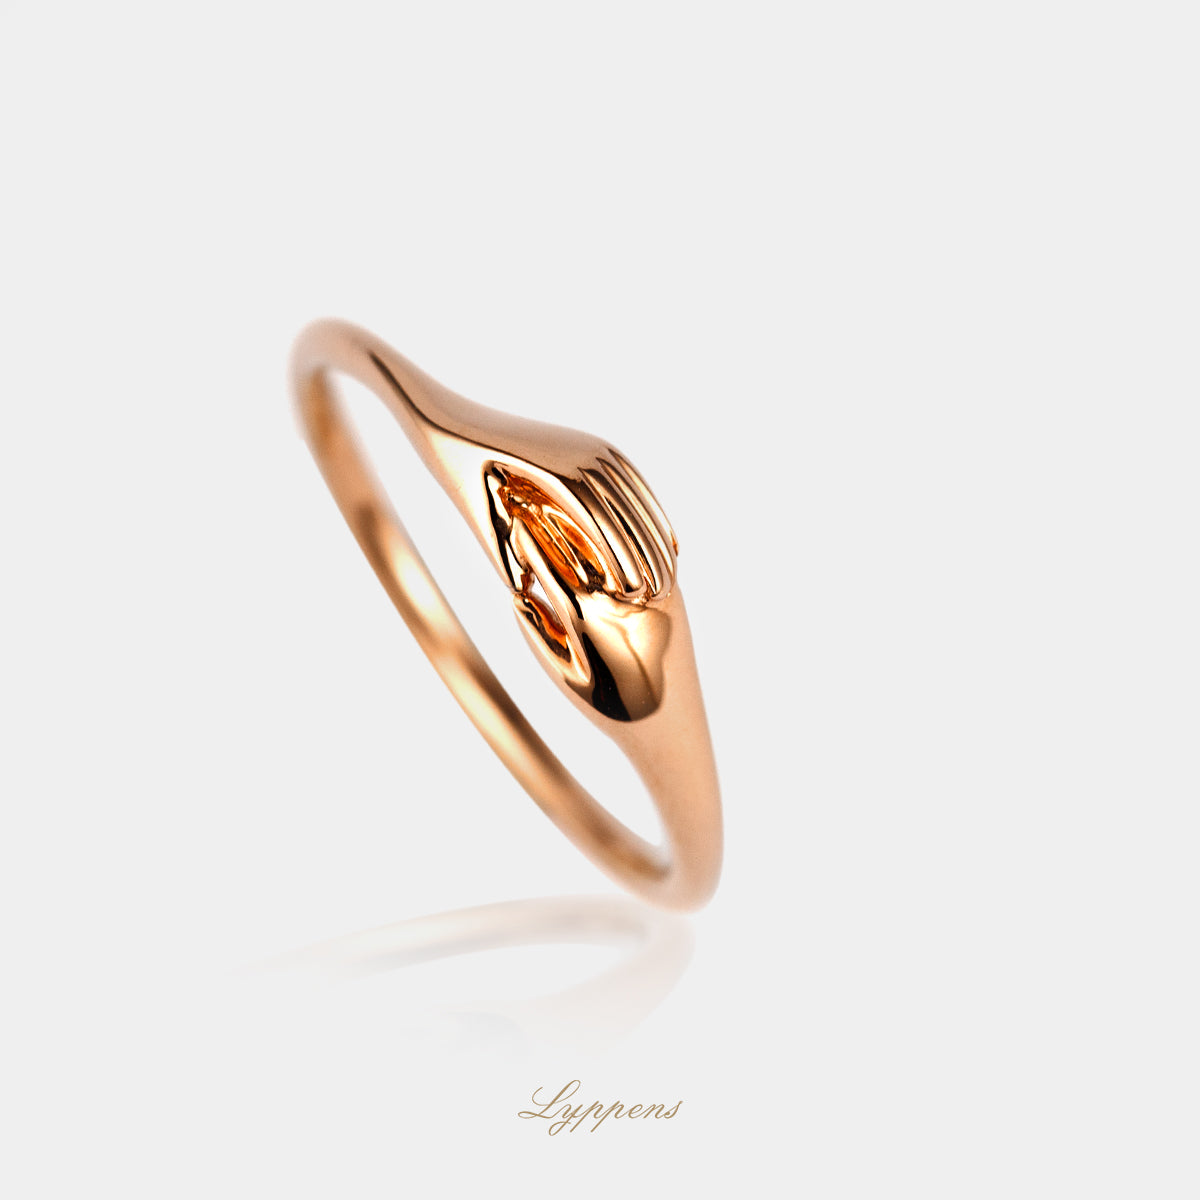 Rose gold ring with interlocked hands